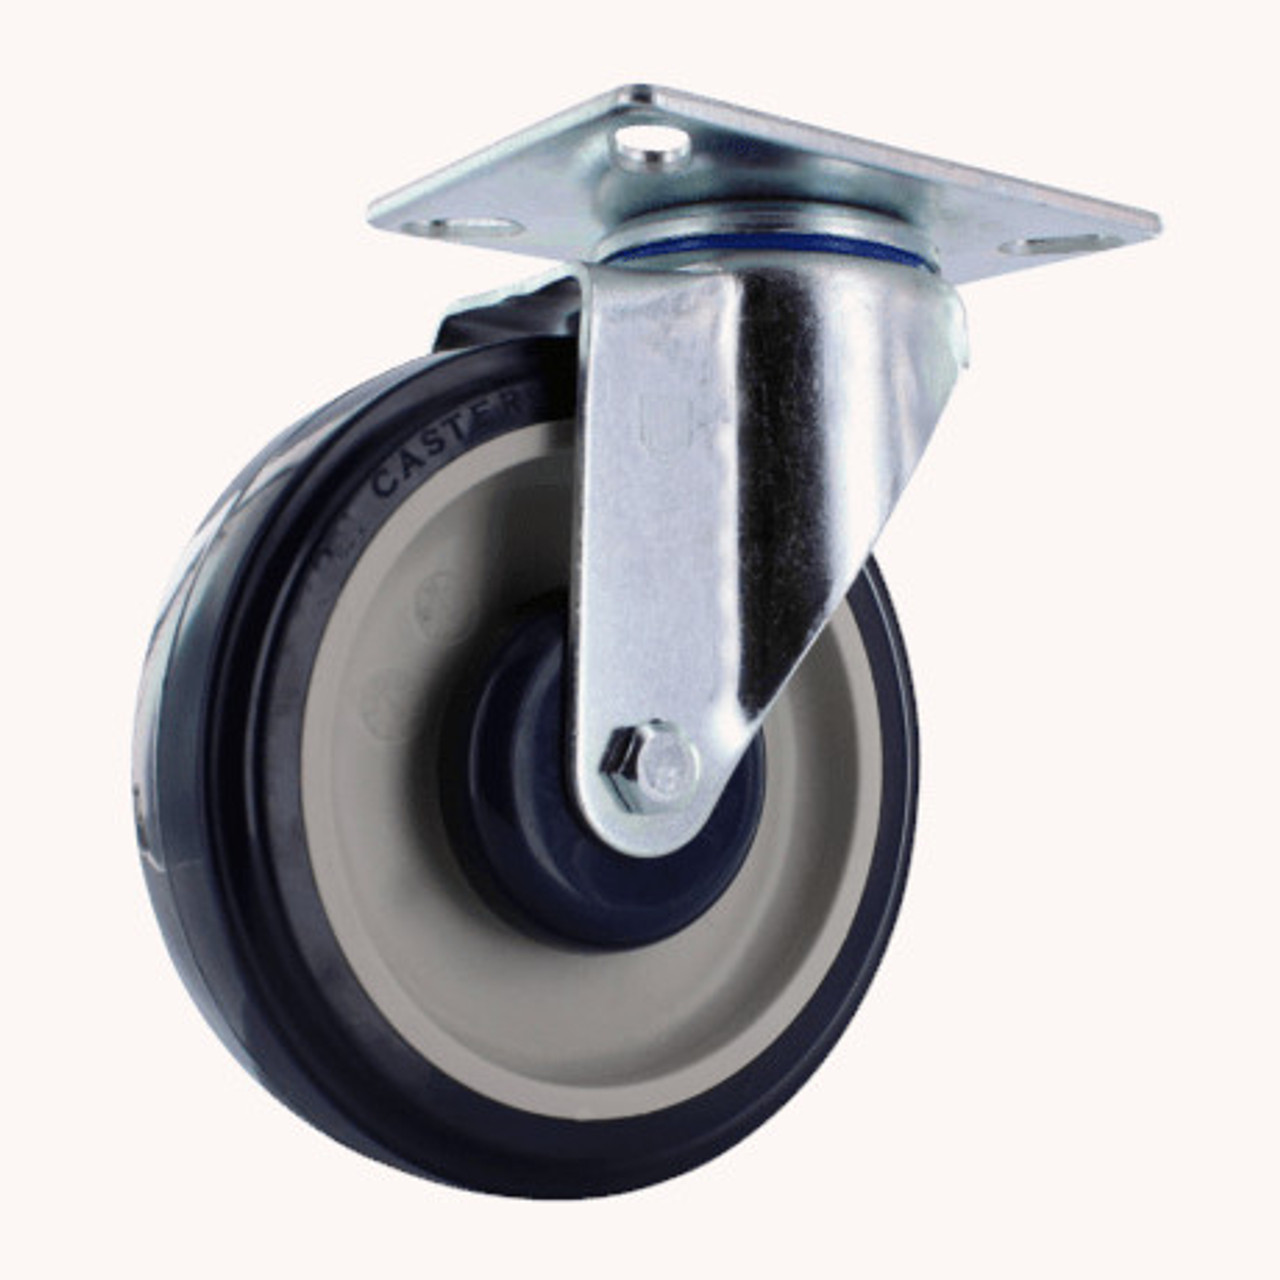 B000312 - AC 5 Inch Plate Caster for National Cart